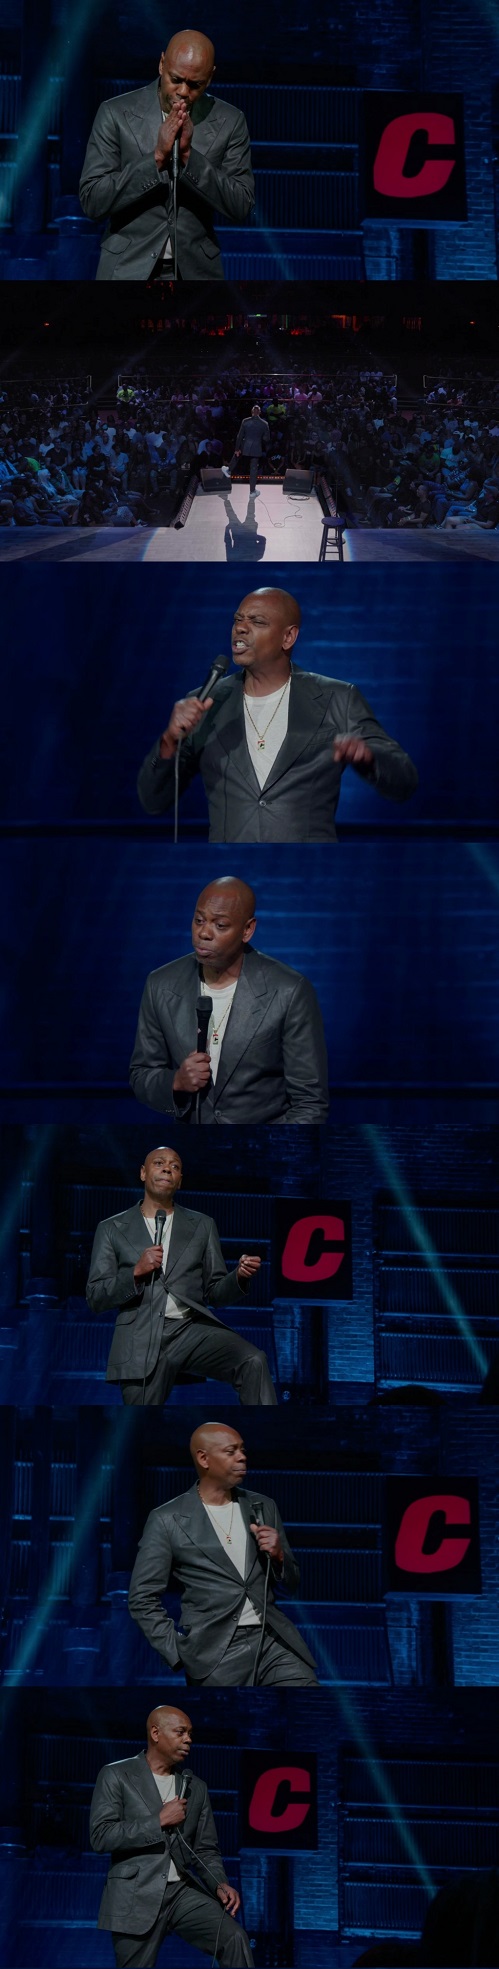 Dave Chappelle The Closer 2021 English 480p Web-DL ESubs